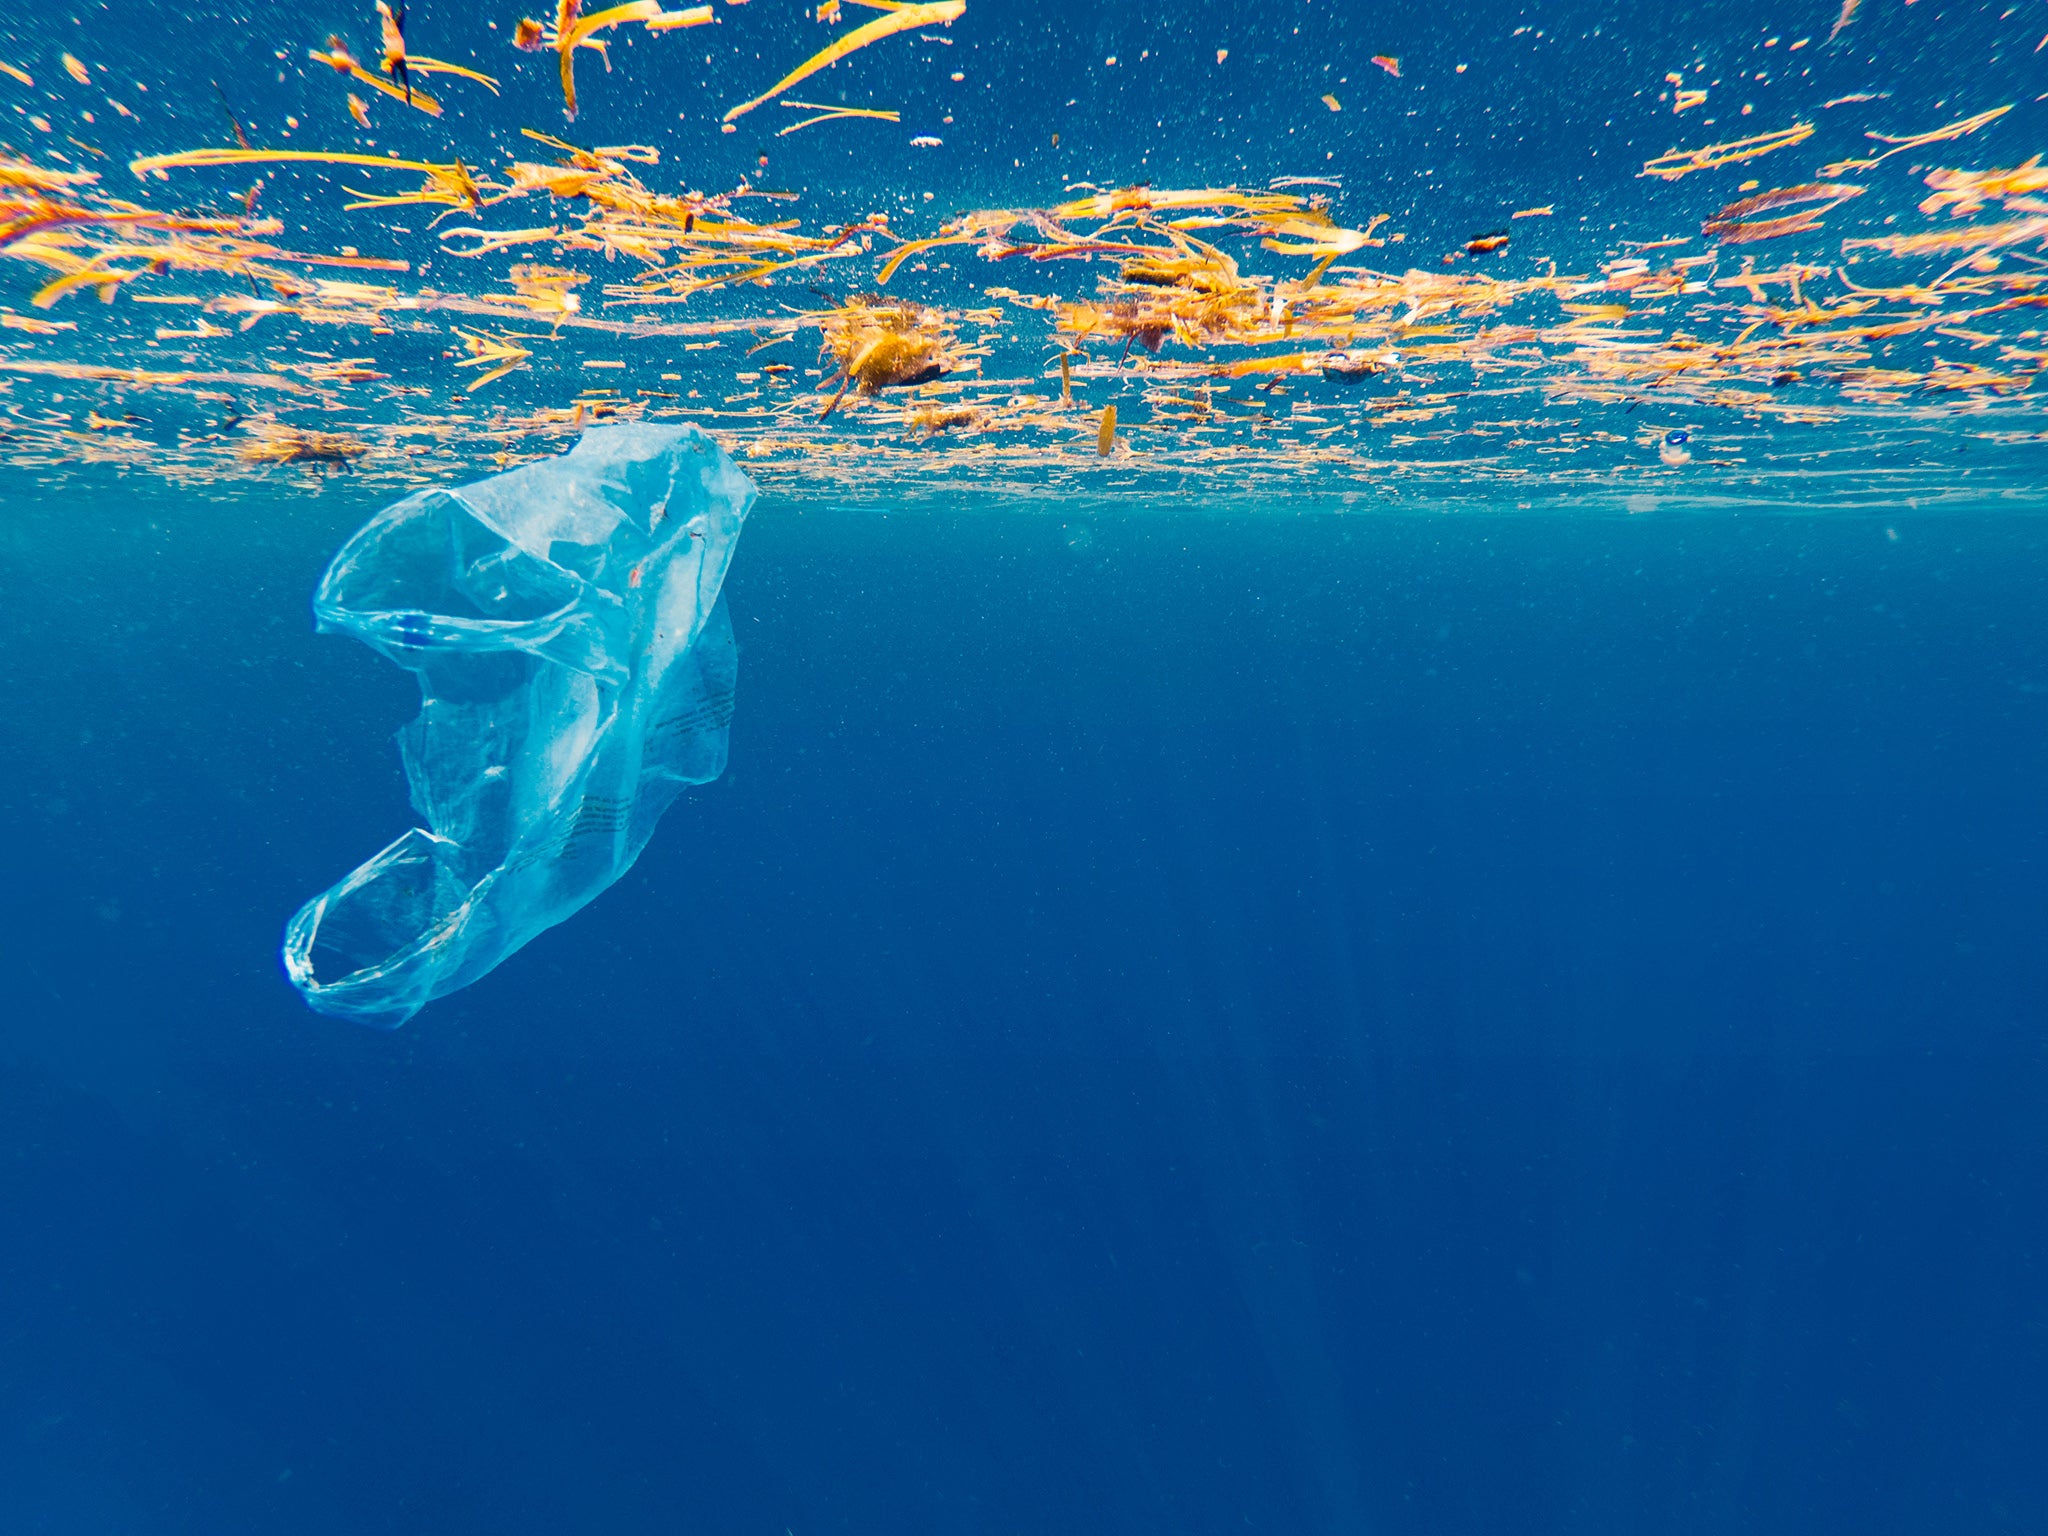 It is estimated that at least 12.7 million tonnes of plastic ends up in our oceans each year